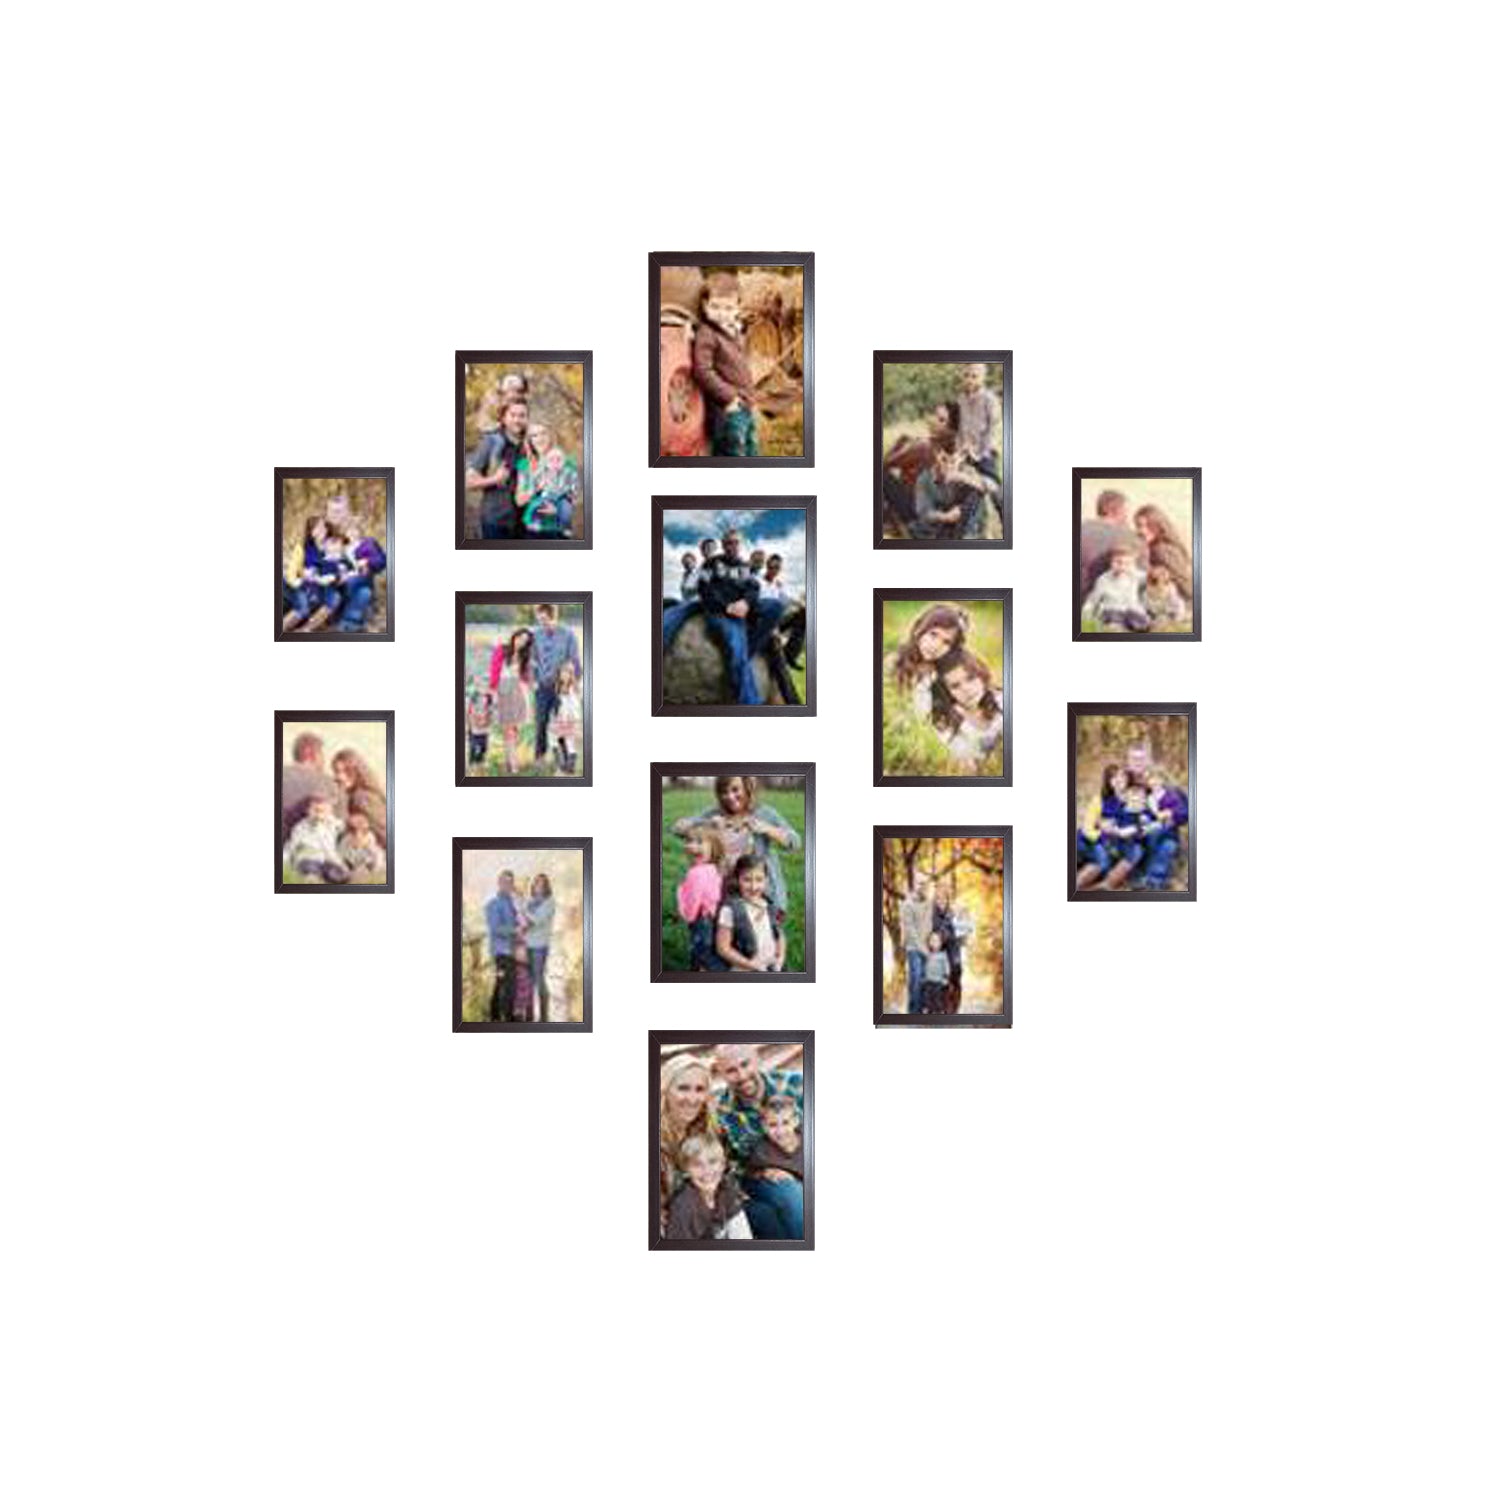 Buy brown Pack of 14 Pack Collage Photo Frames set, Custom Pics Free Print (5x7 - 4 Pc, 4x6 - 10 Pc)